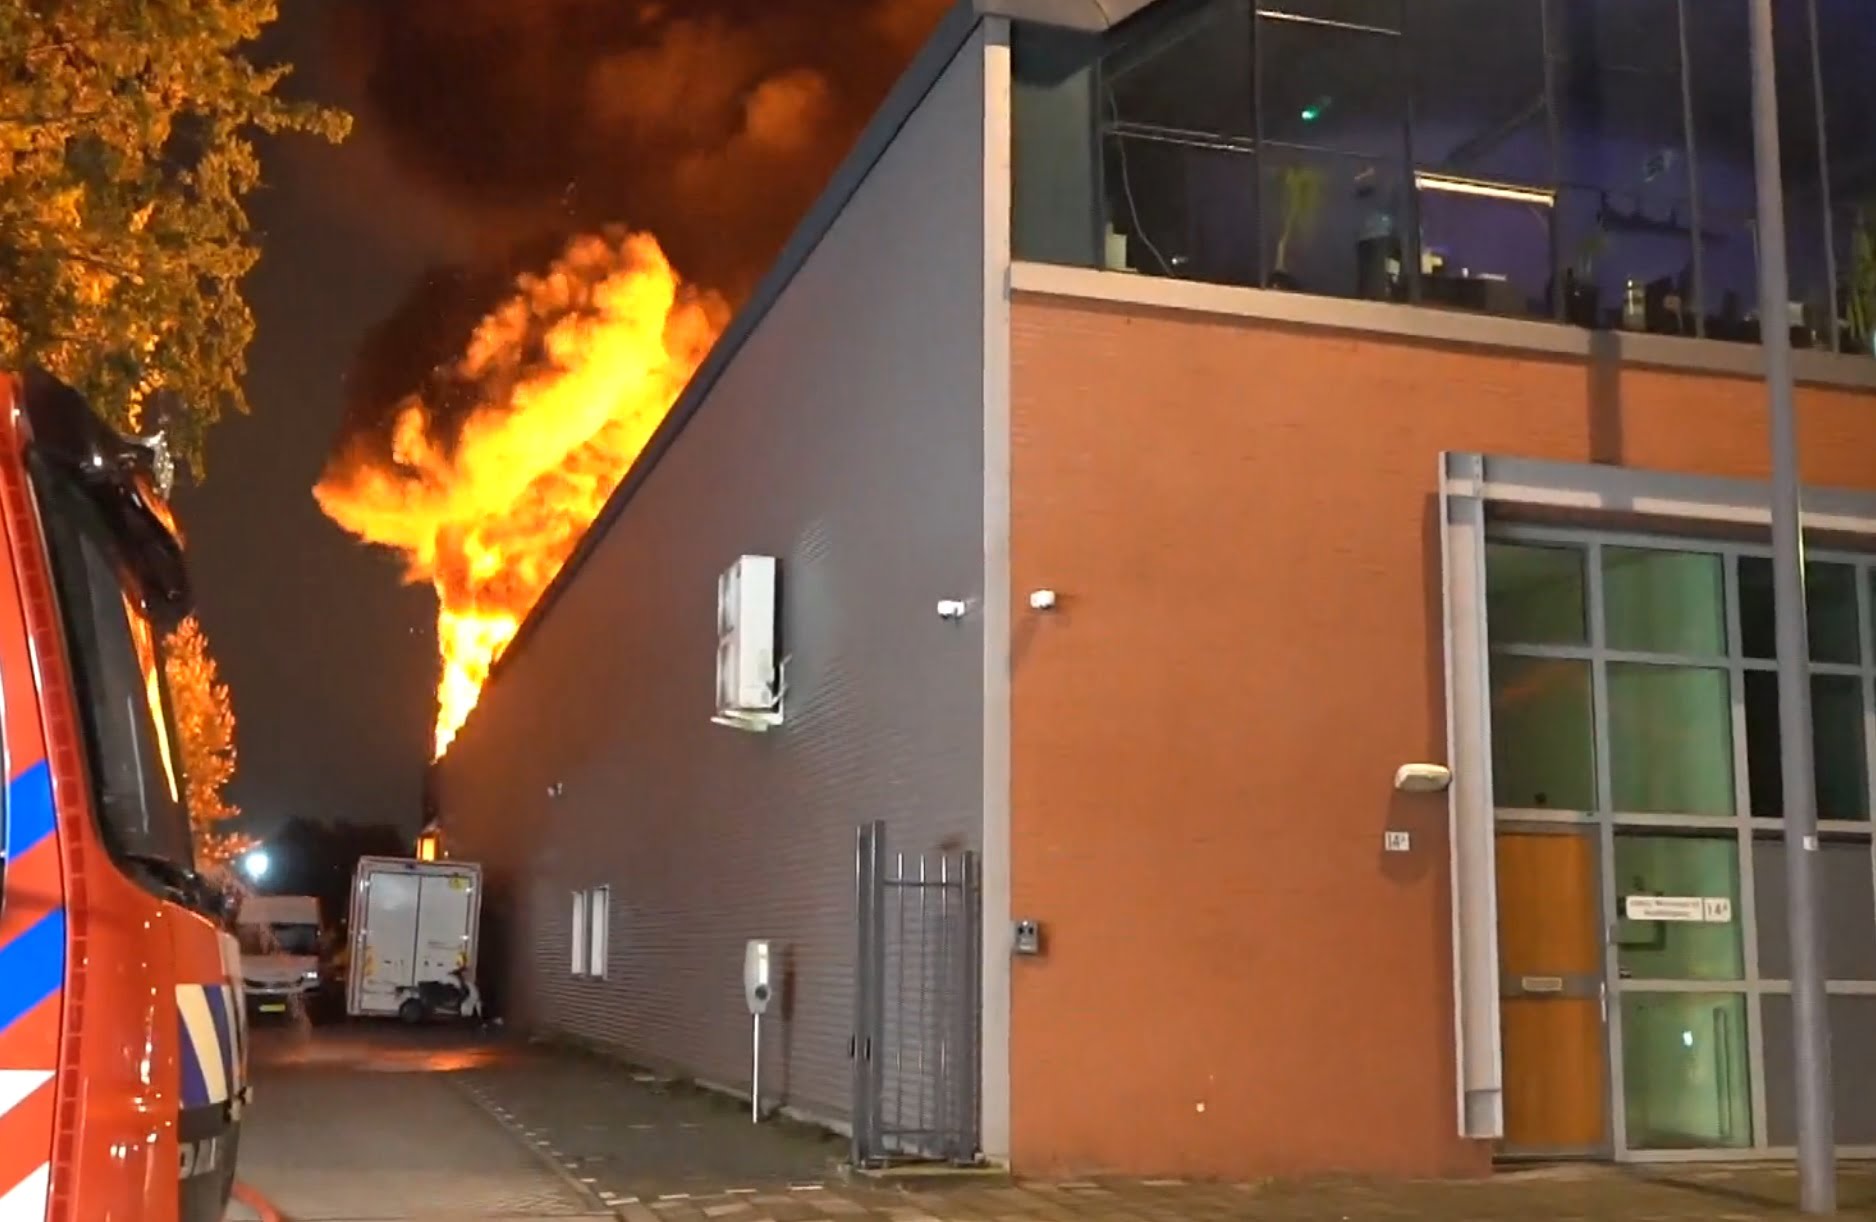 Customer hardly notices fire at Go-sharing